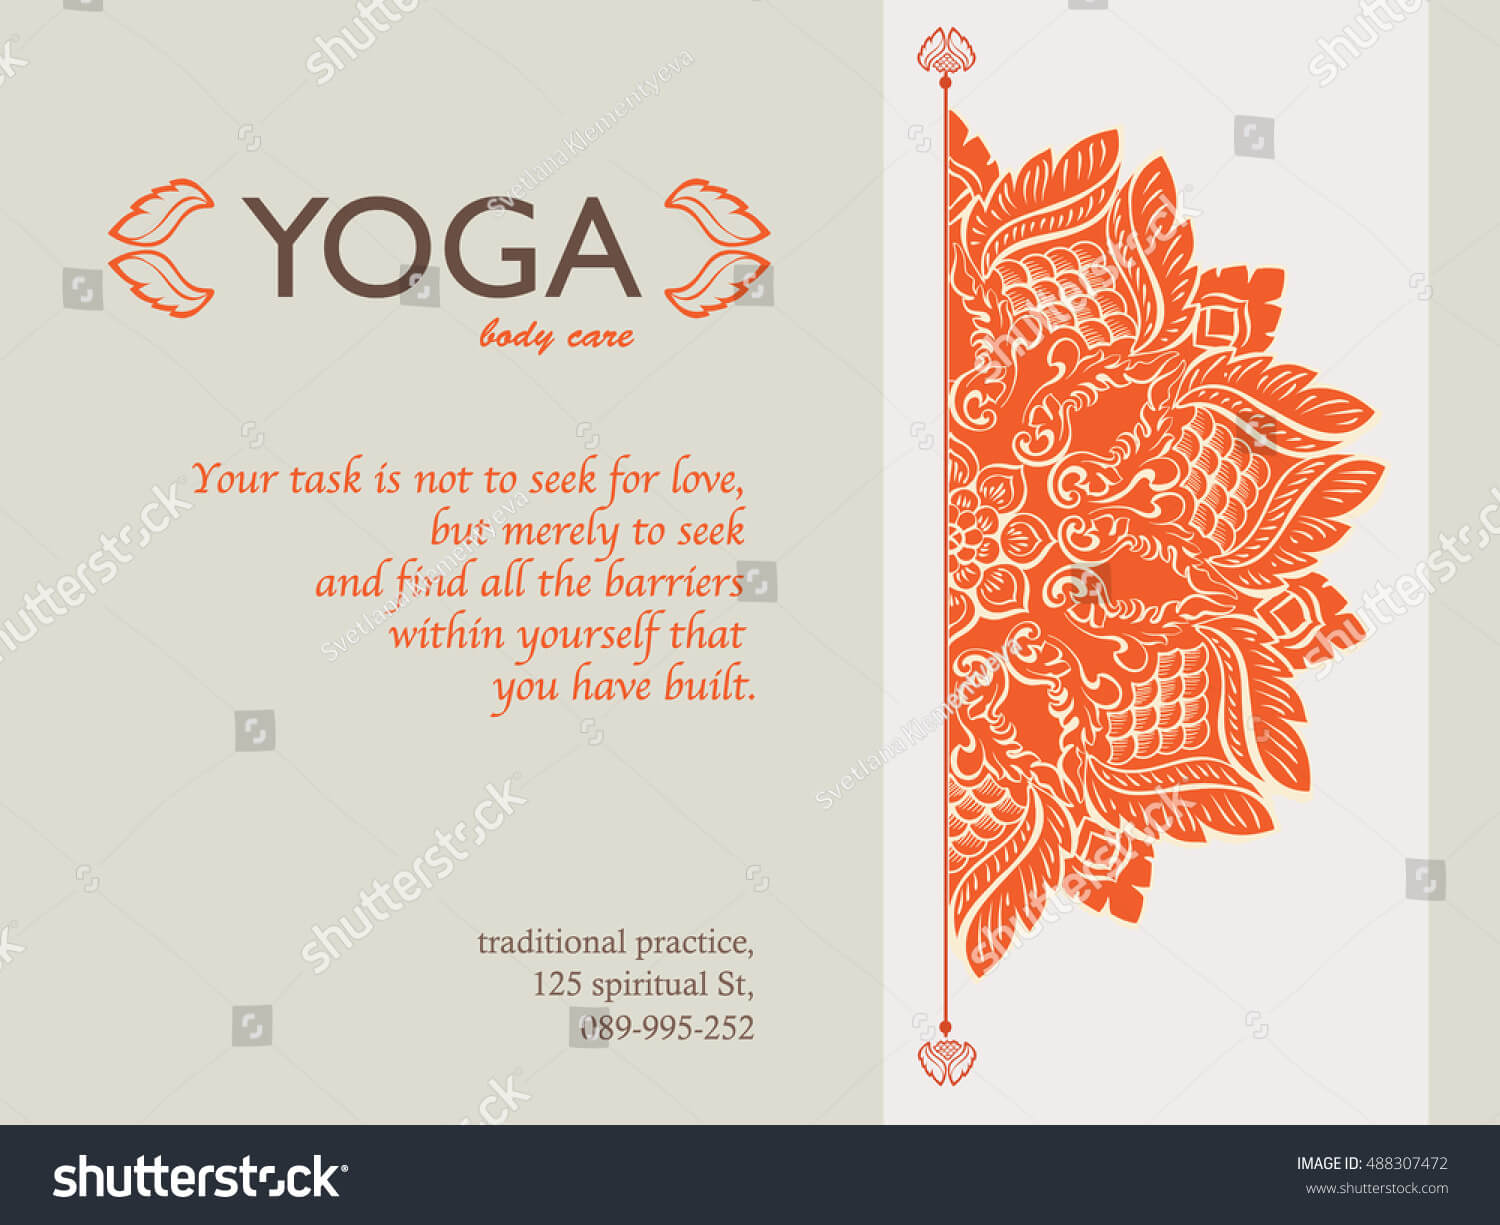 Yoga Gift Certificate Templates | Gift Certificate Templates Within Yoga Gift Certificate Template Free